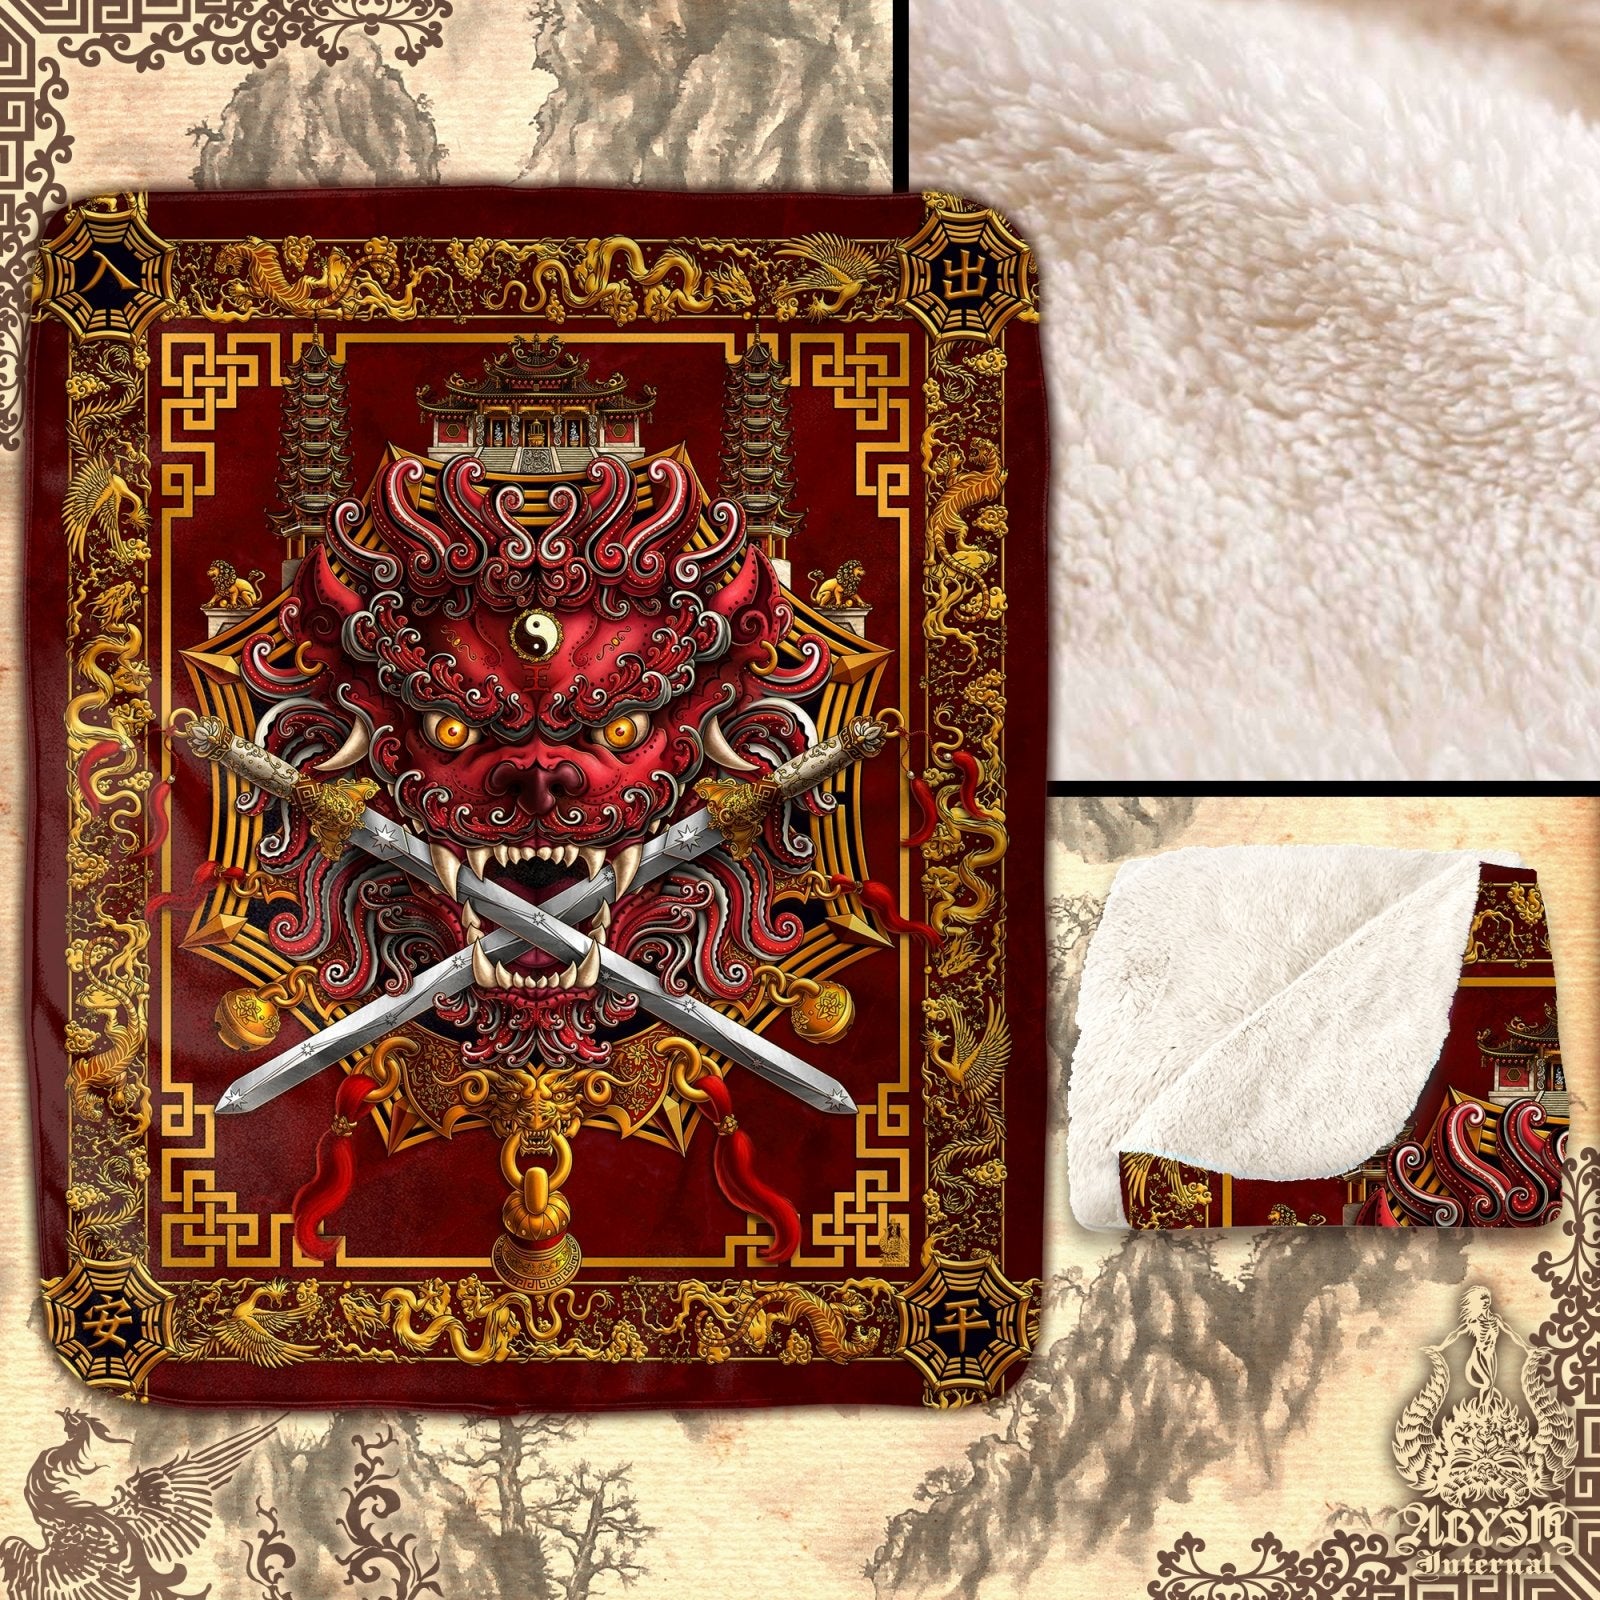 Asian Lion Throw Fleece Blanket, Taiwan Sword Lion, Chinese Art, Gamer Room Decor, Eclectic and Funky Gift - Red - Abysm Internal